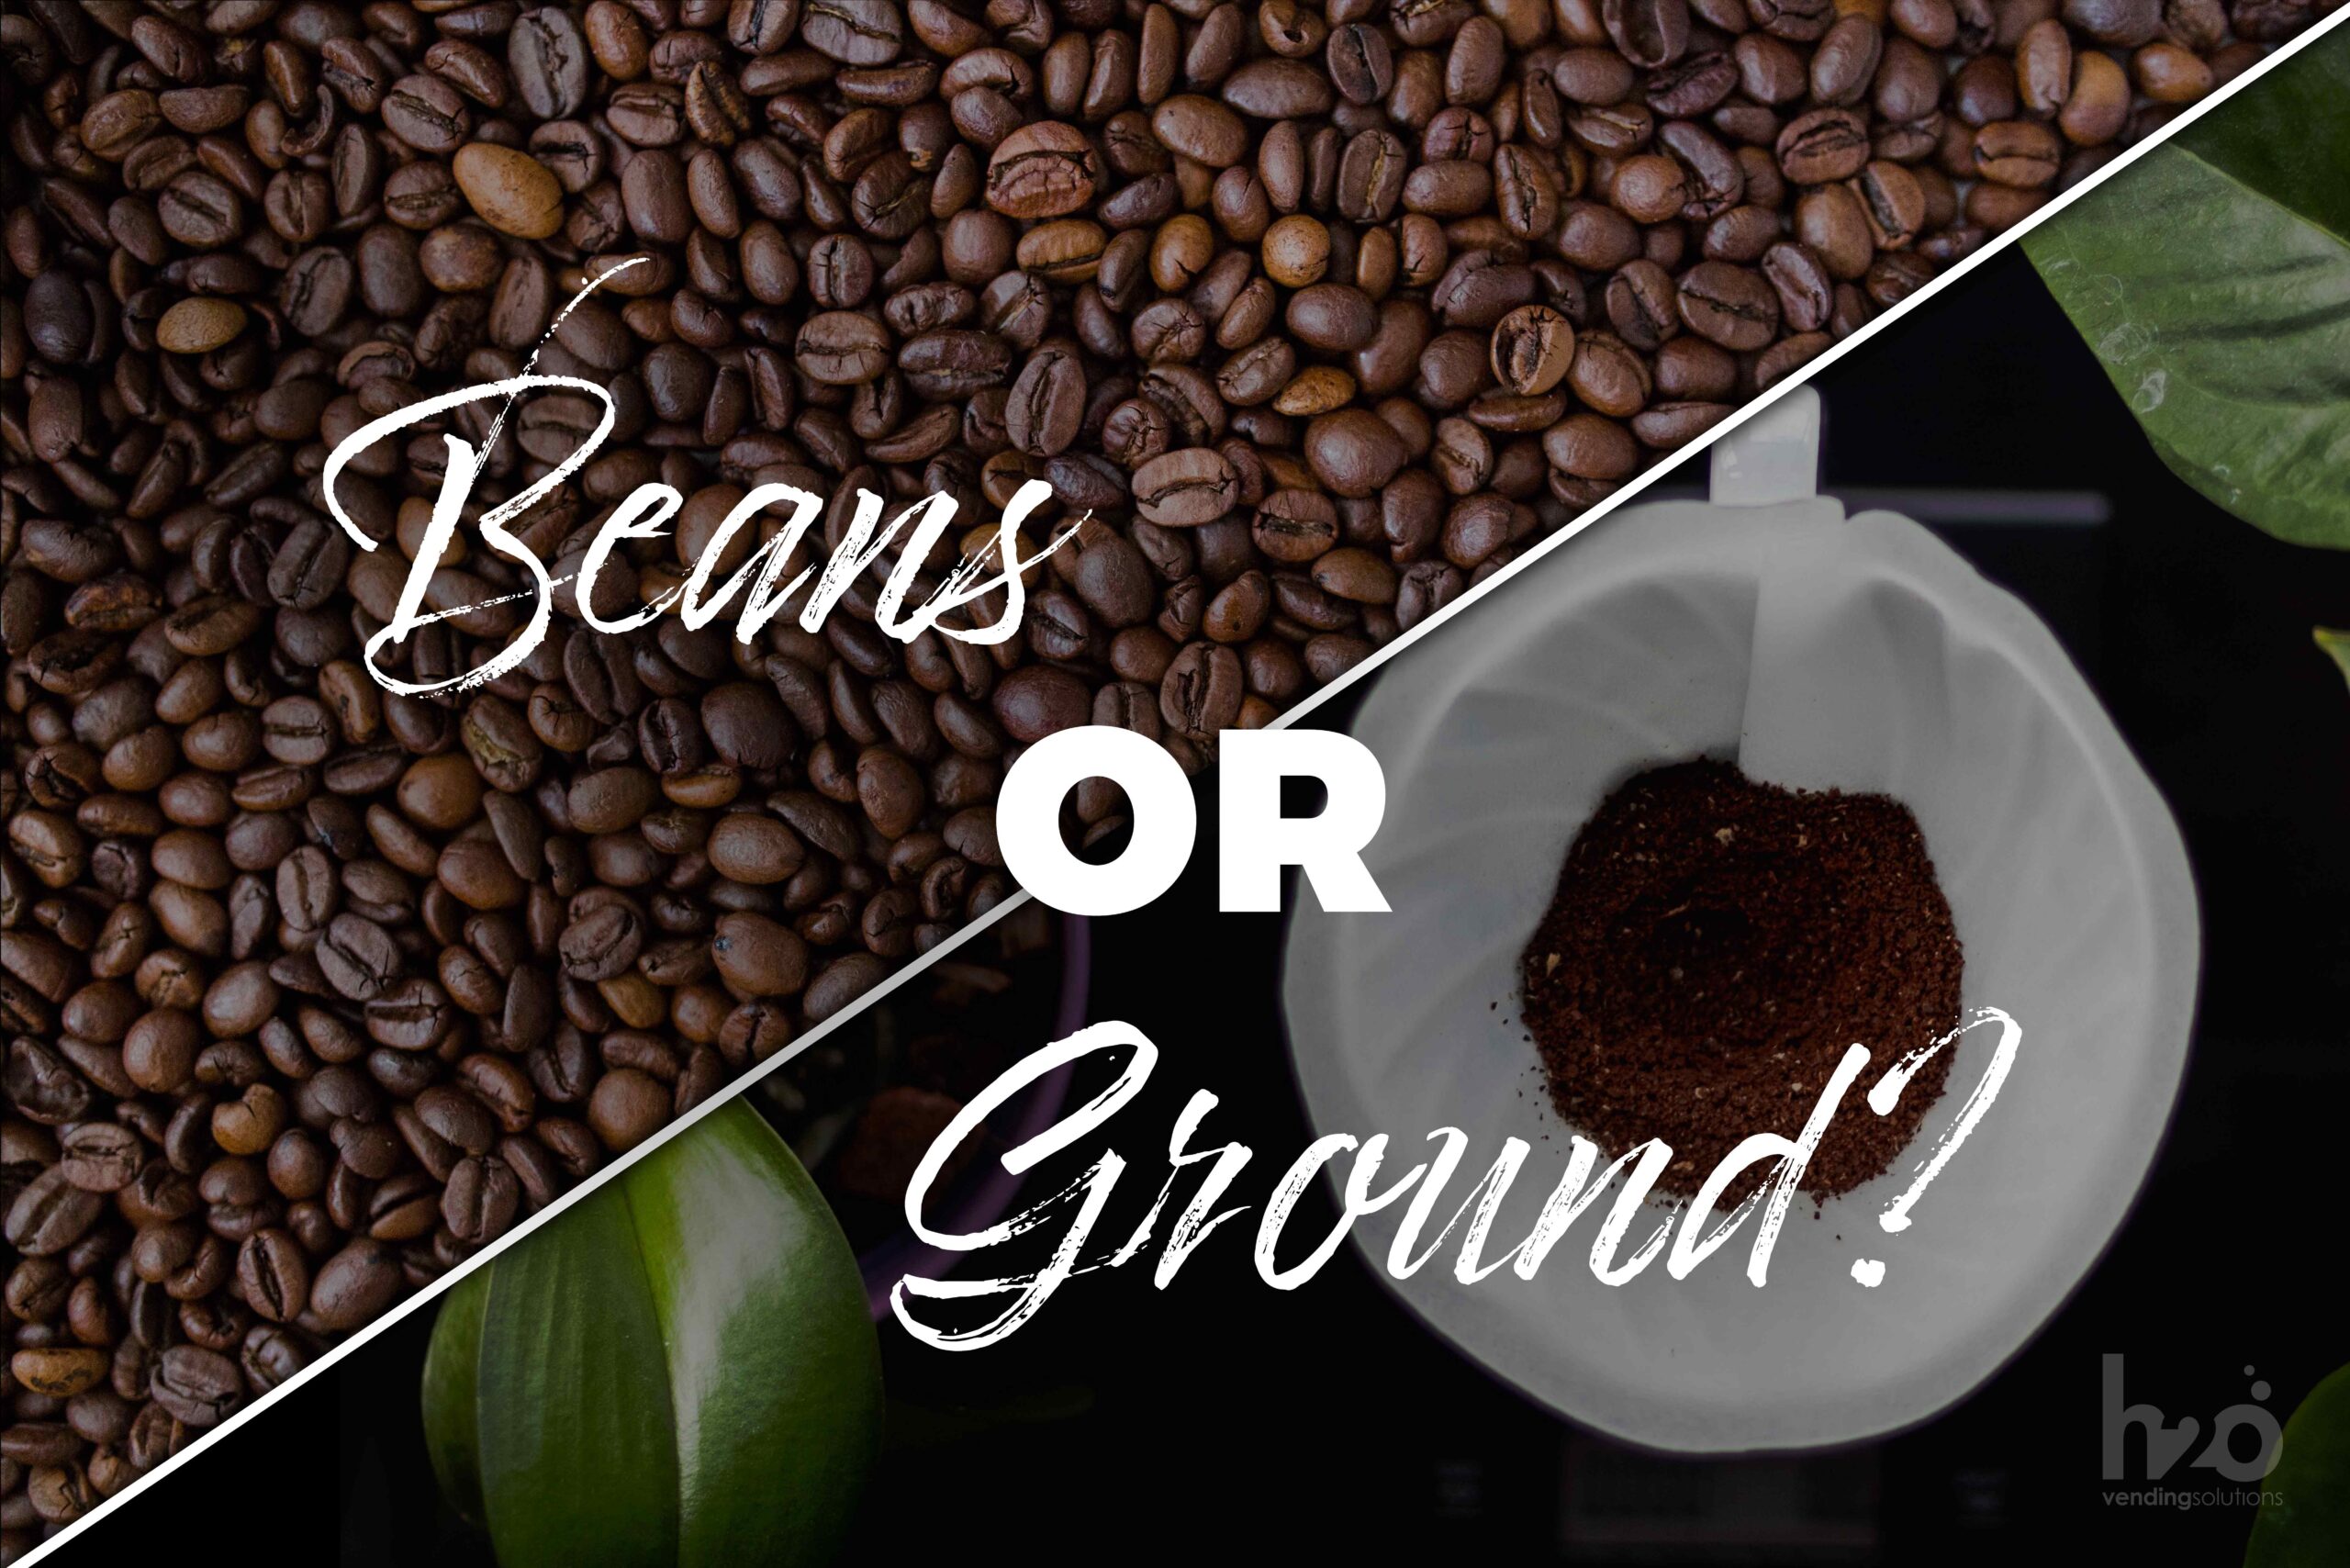 Are coffee beans or ground coffee better?